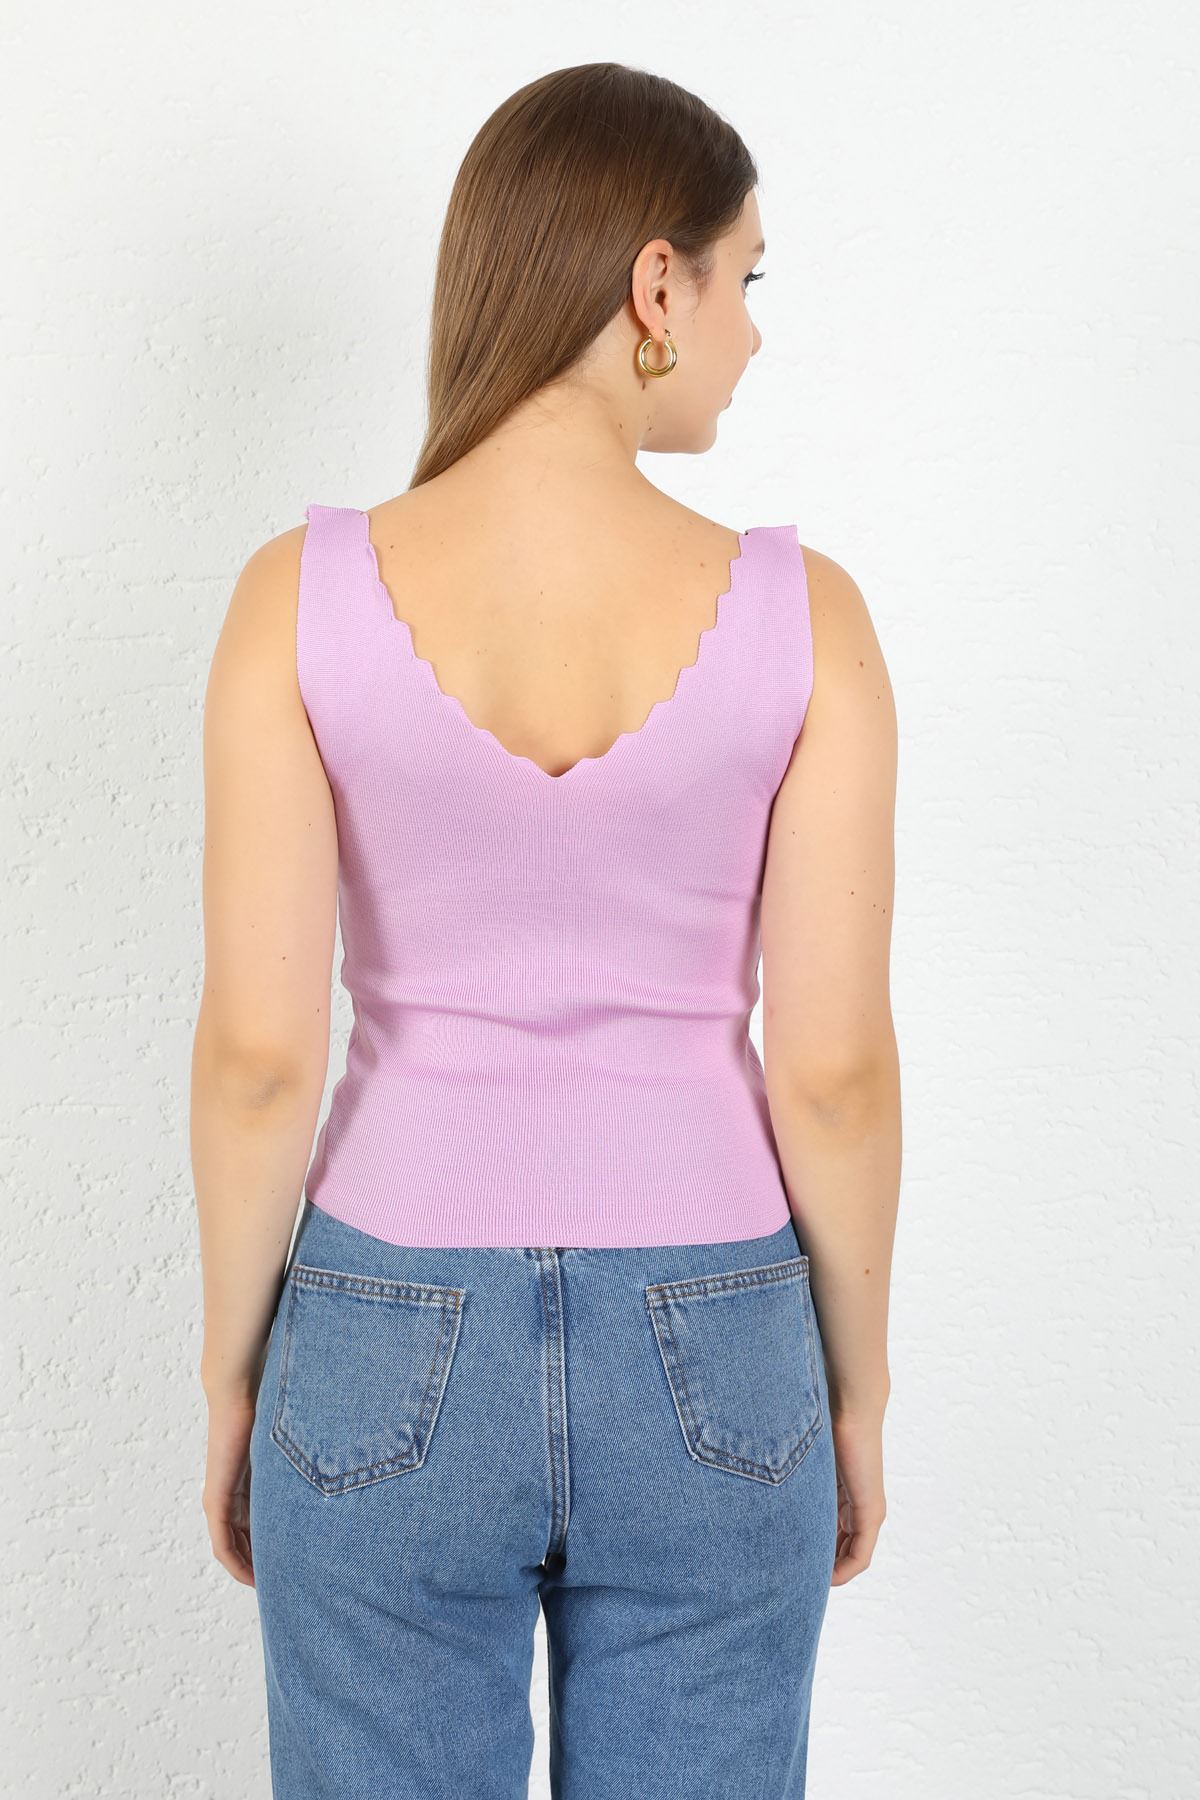 Knitwear Fabric Stair Collar Women's Blouse-Lilac